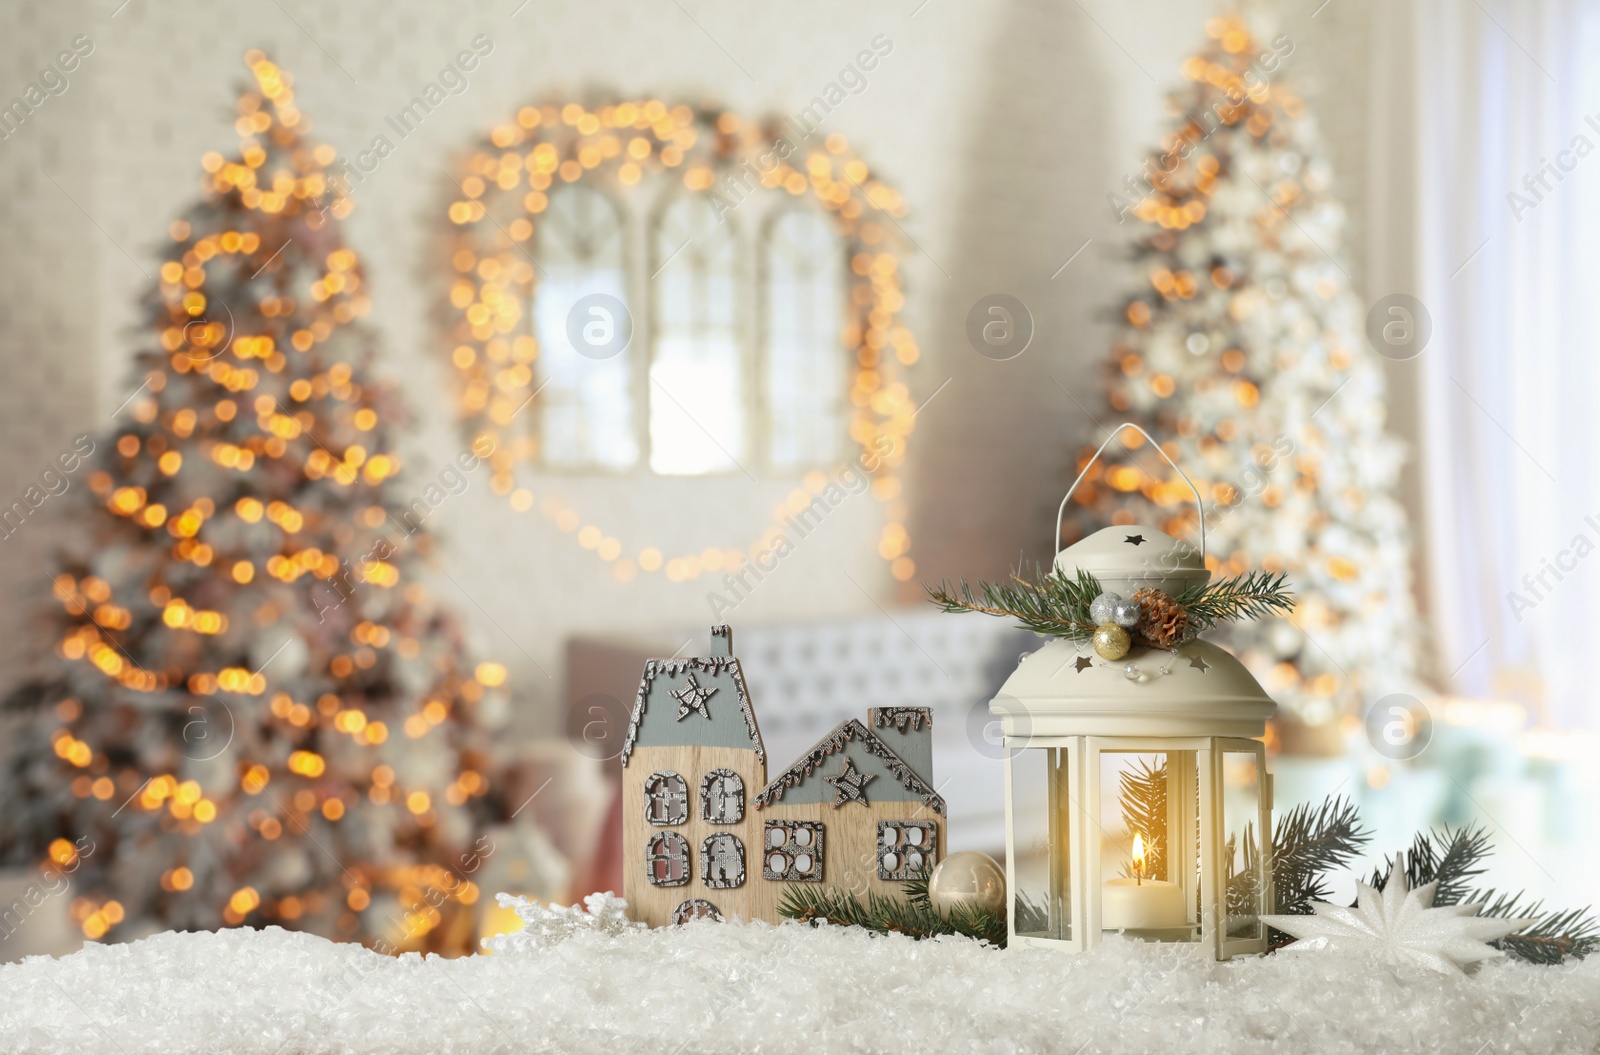 Image of Composition with Christmas lantern in decorated room